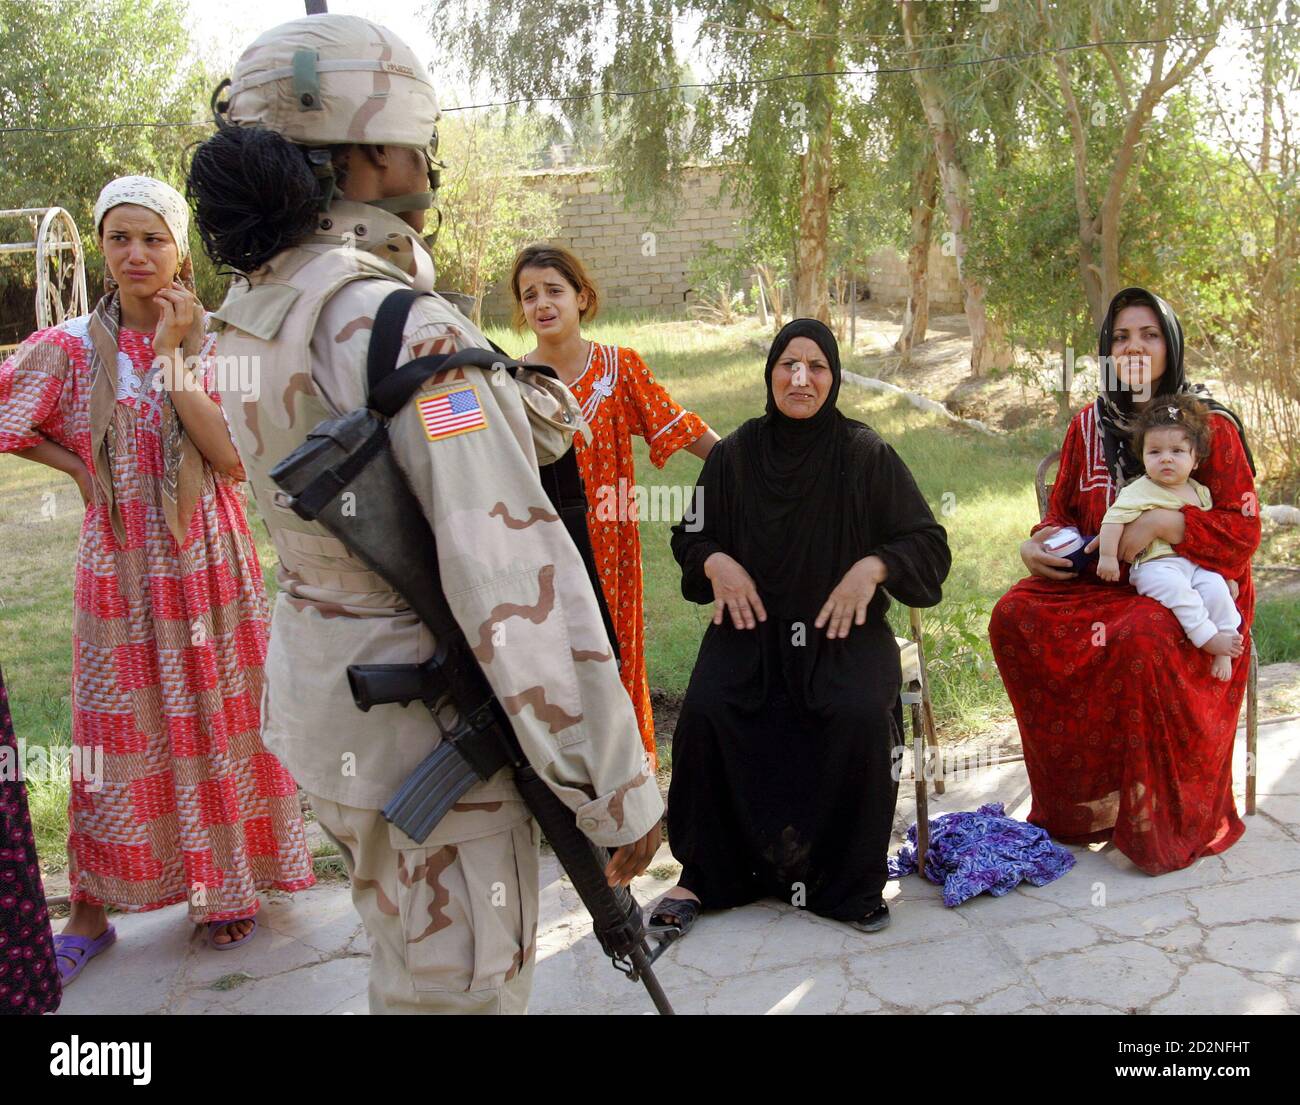 A female U.S. soldier of the 3rd battalion, 7th Infantry, 4th Brigade, 3rd Infantry Division from Ft Benning, Georgia guards crying women after a family member was detained during a raid searching for illegal weapons inside their house in Baghdad August 3, 2005. Fourteen Marines were killed in a roadside bomb blast in western Iraq on Wednesday, the U.S. military said, in one of the single deadliest attacks against U.S. forces since the beginning of the war. REUTERS/Andrea Comas  ACO/SA Stock Photo